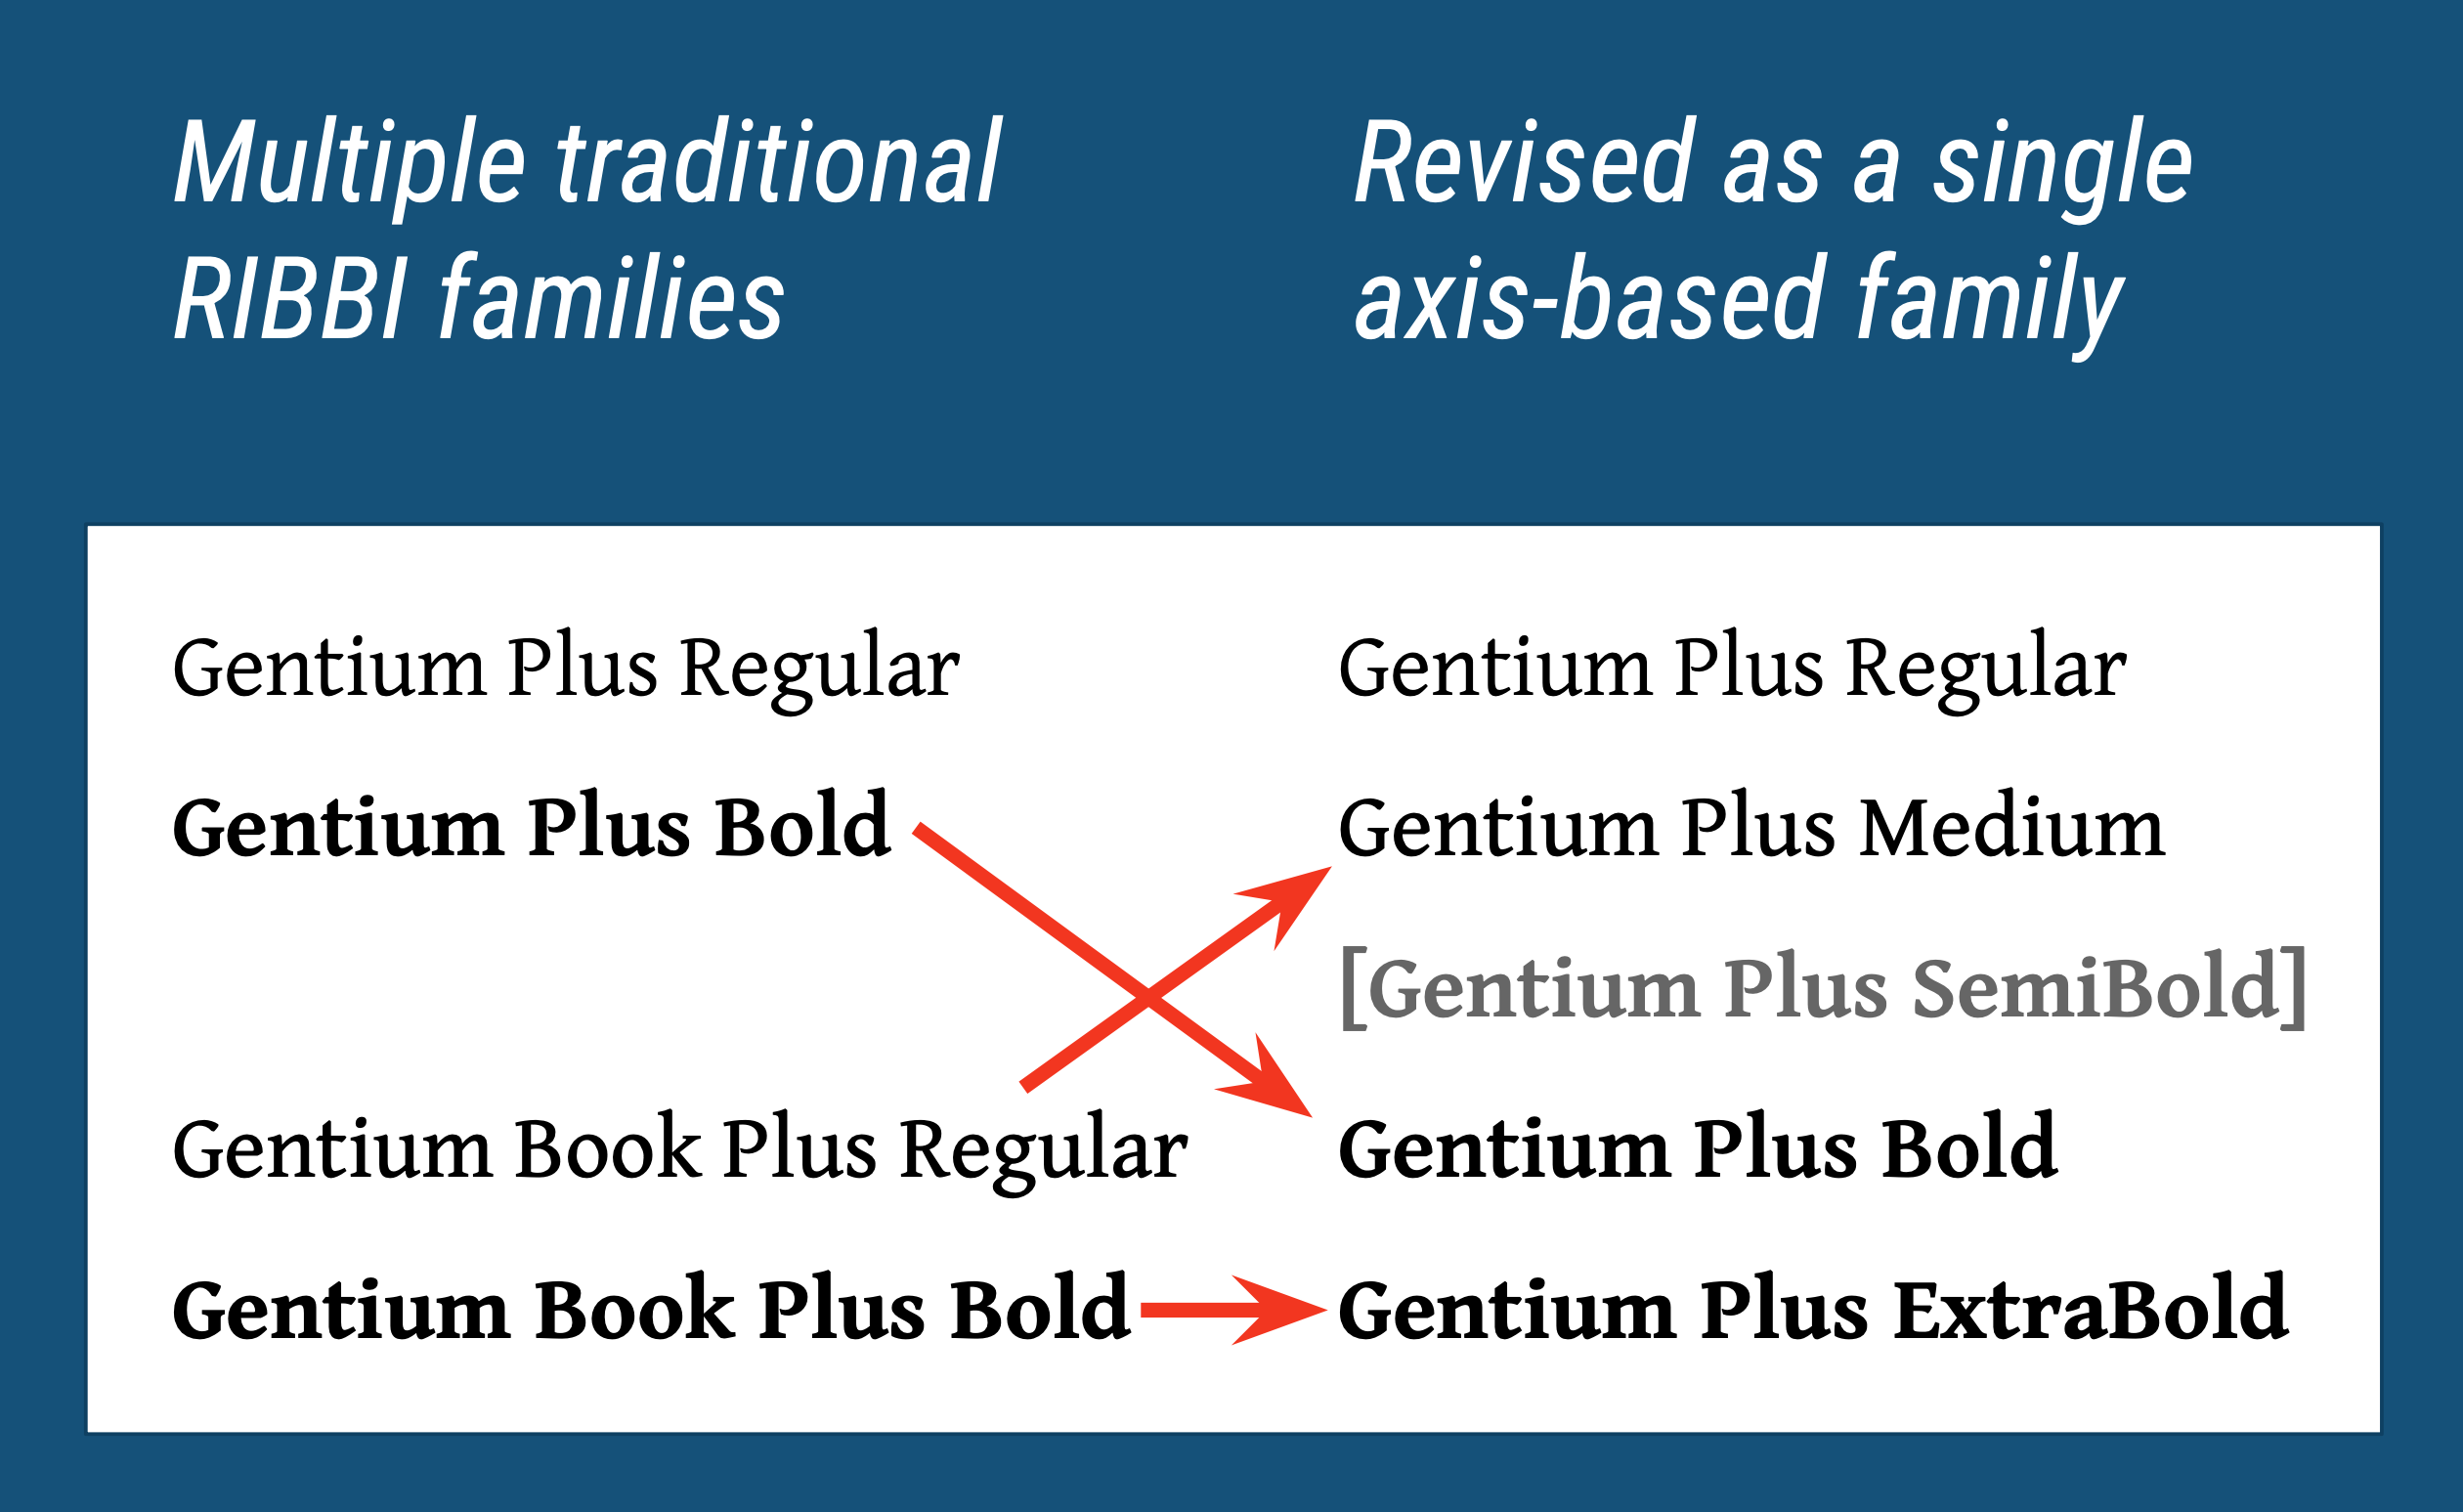 An axis-based Gentium family